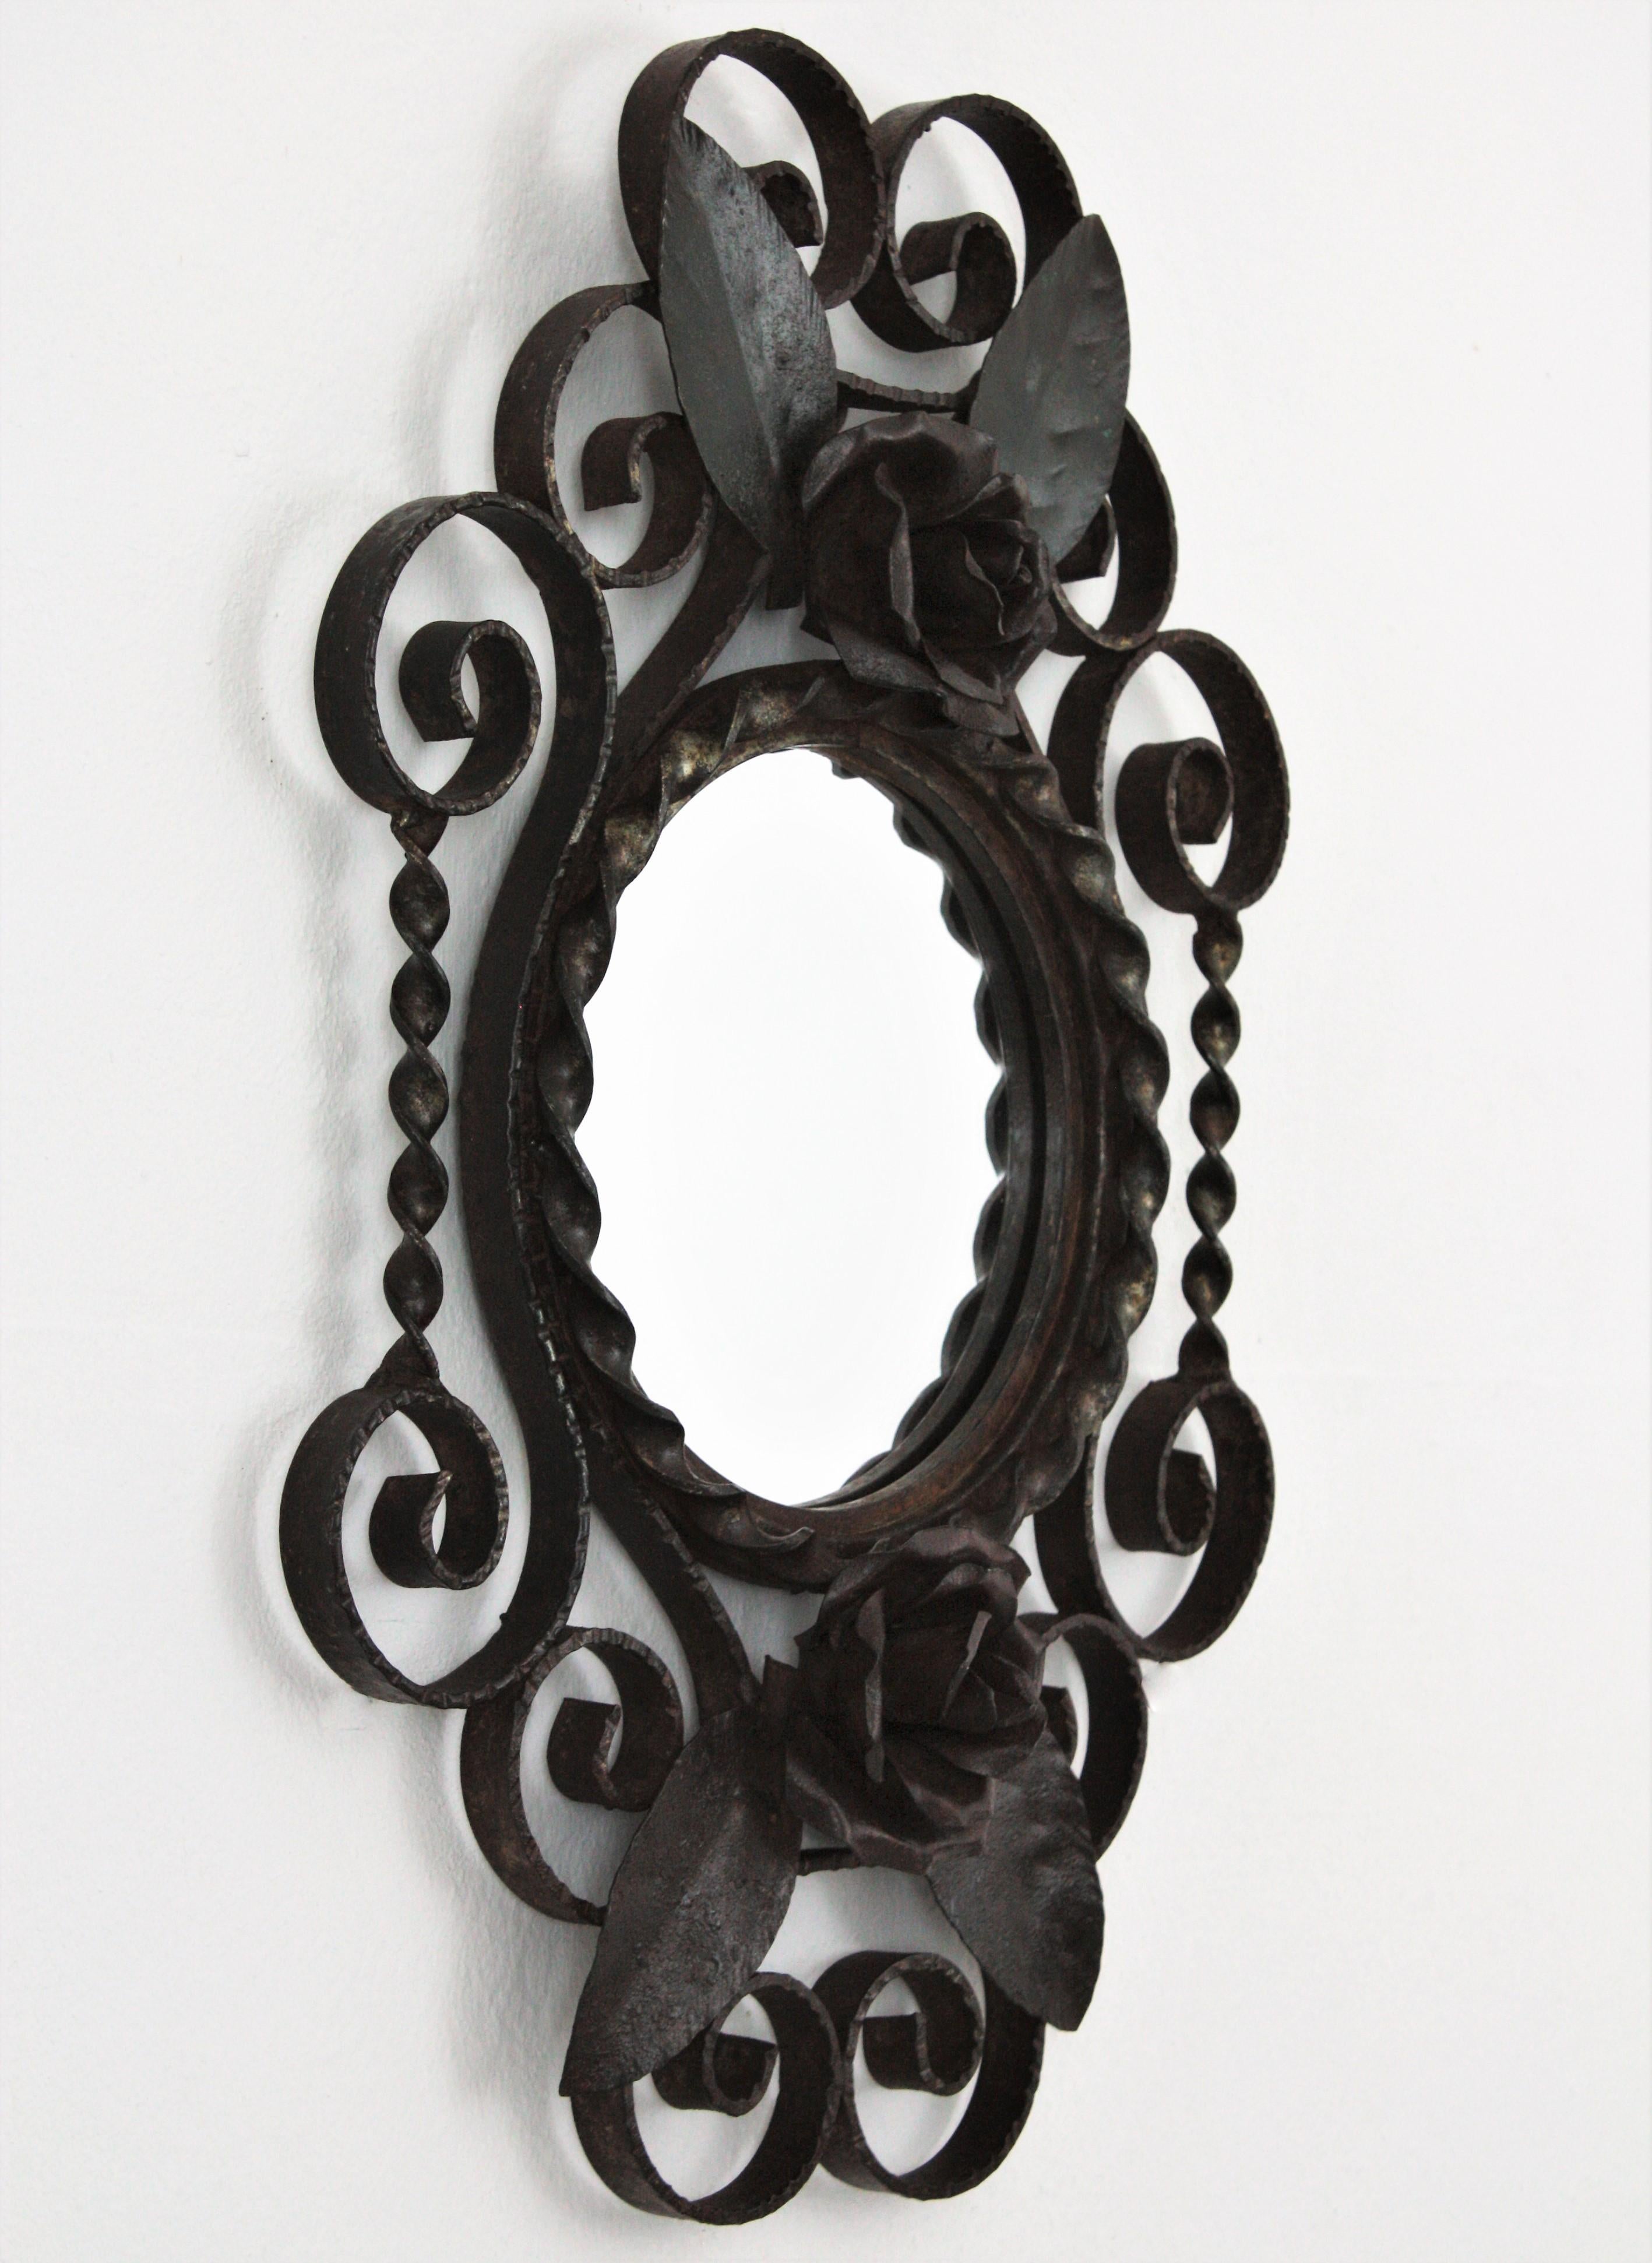 Lovely petite hand forged wall mirror with floral and scroll details. France, 1940s.
This iron mirror is all made by hand. It has scroll and twisted iron decorations surrounding a central round glass and two iron roses with leaves accenting the top